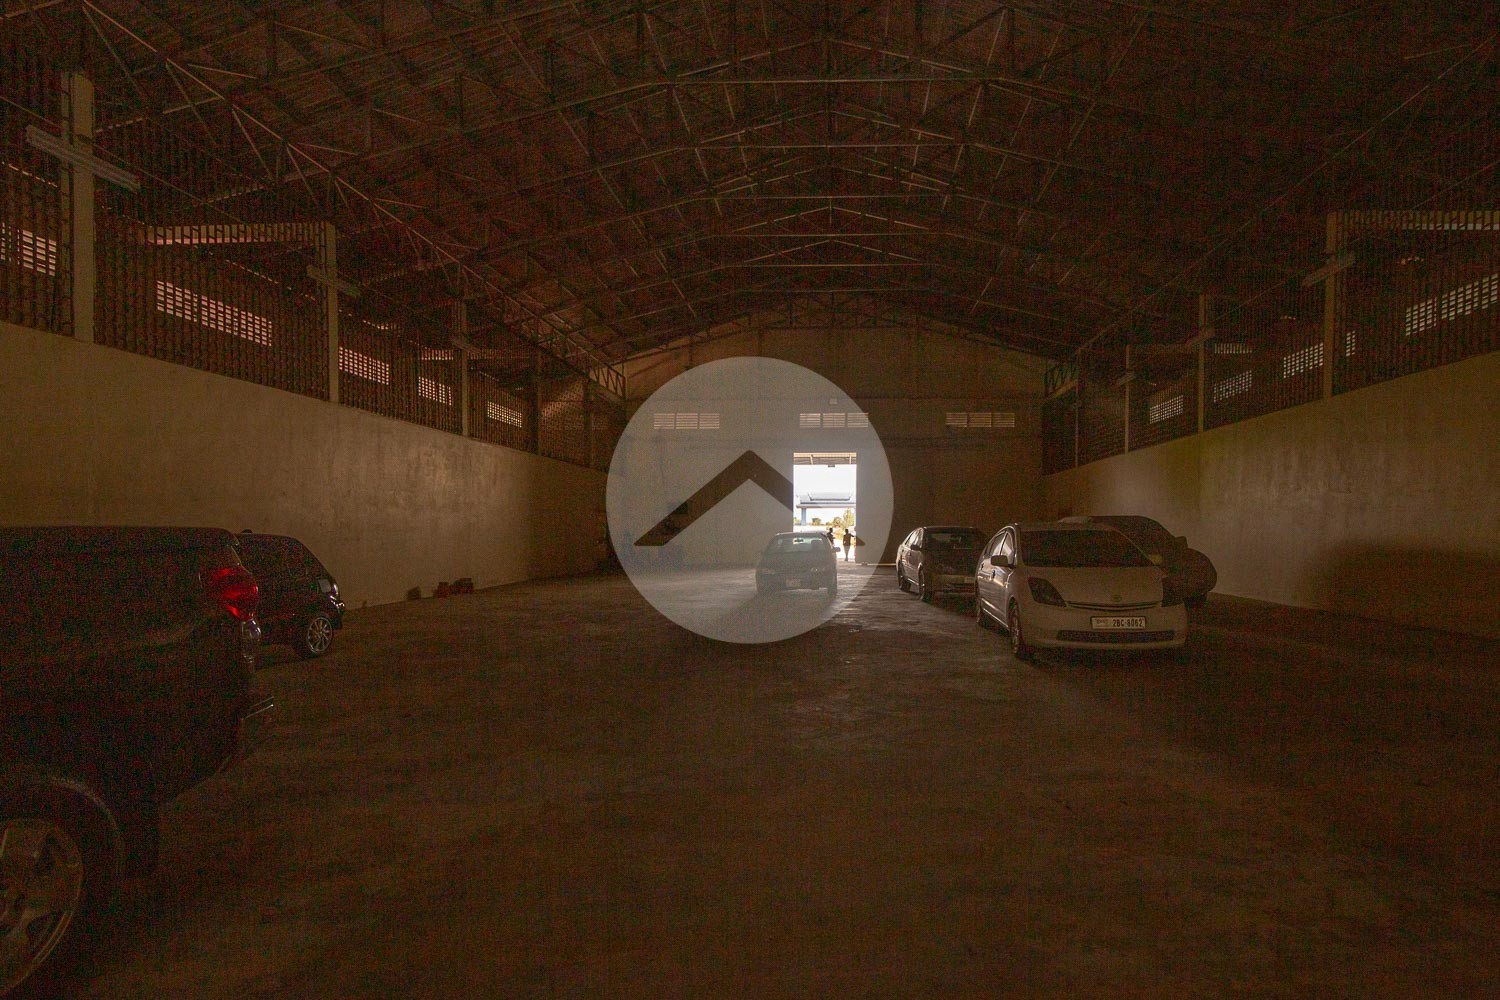 3000 Sqm Commercial Warehouse For Rent - Takeo Province thumbnail